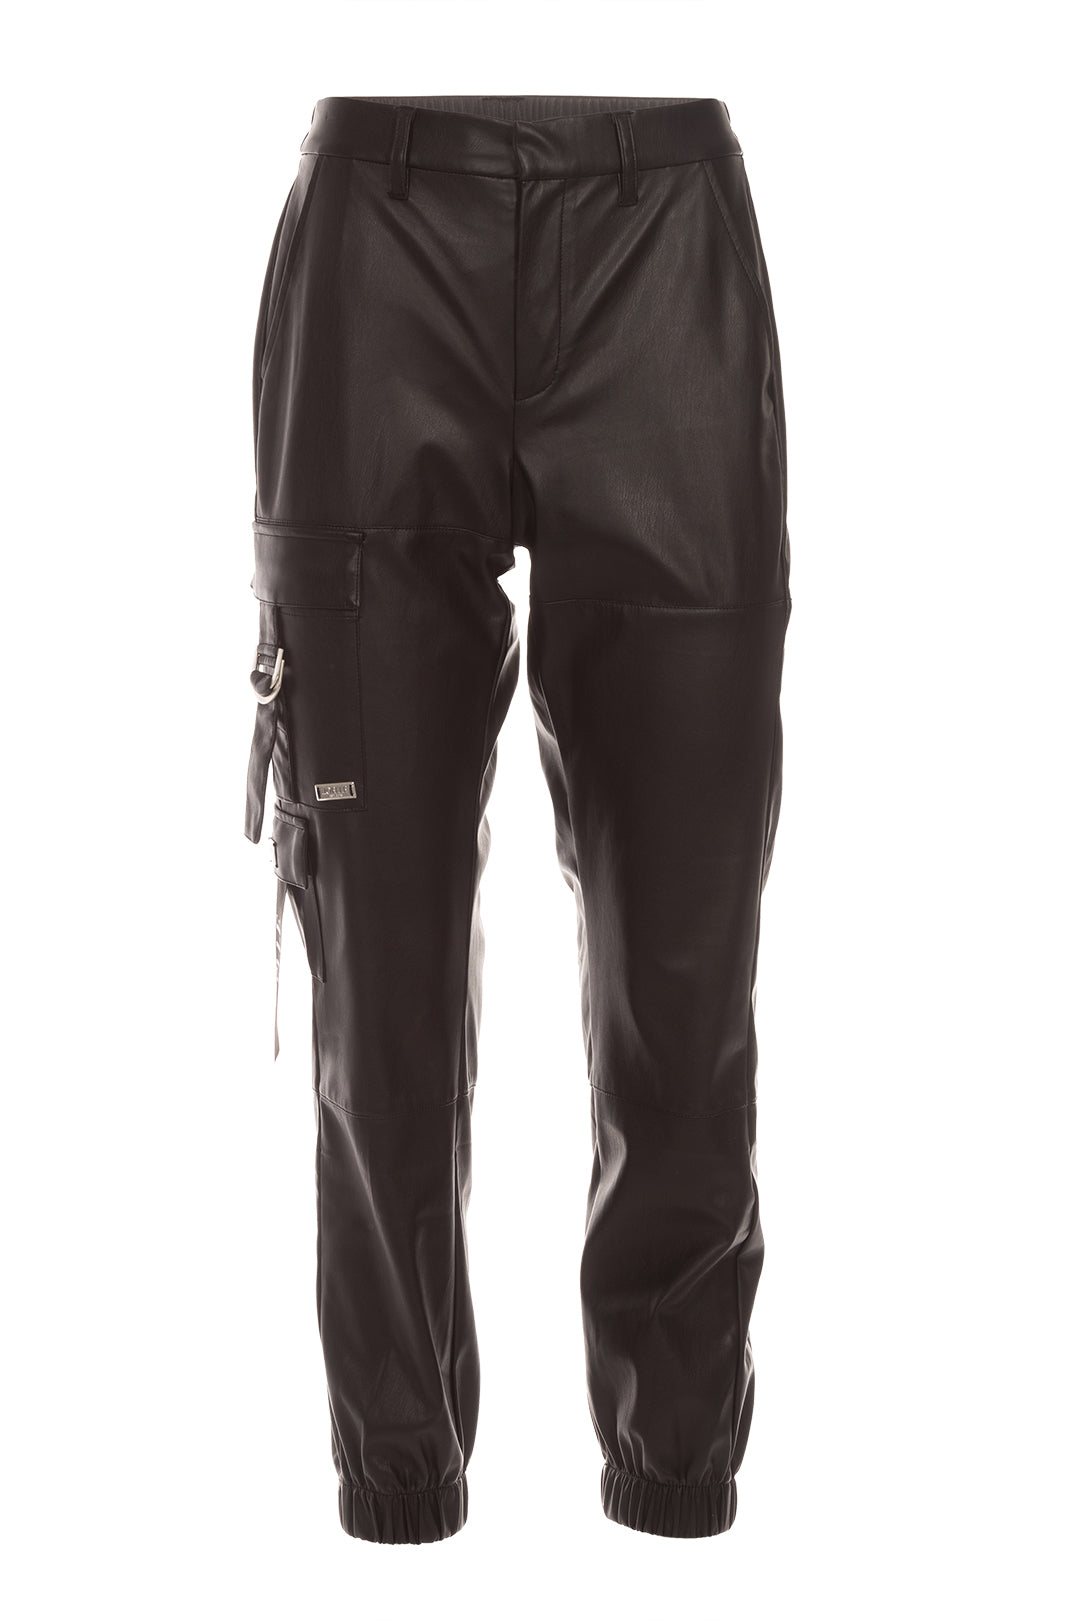 Black leather-effect pants with asymmetrical pockets | Daphne